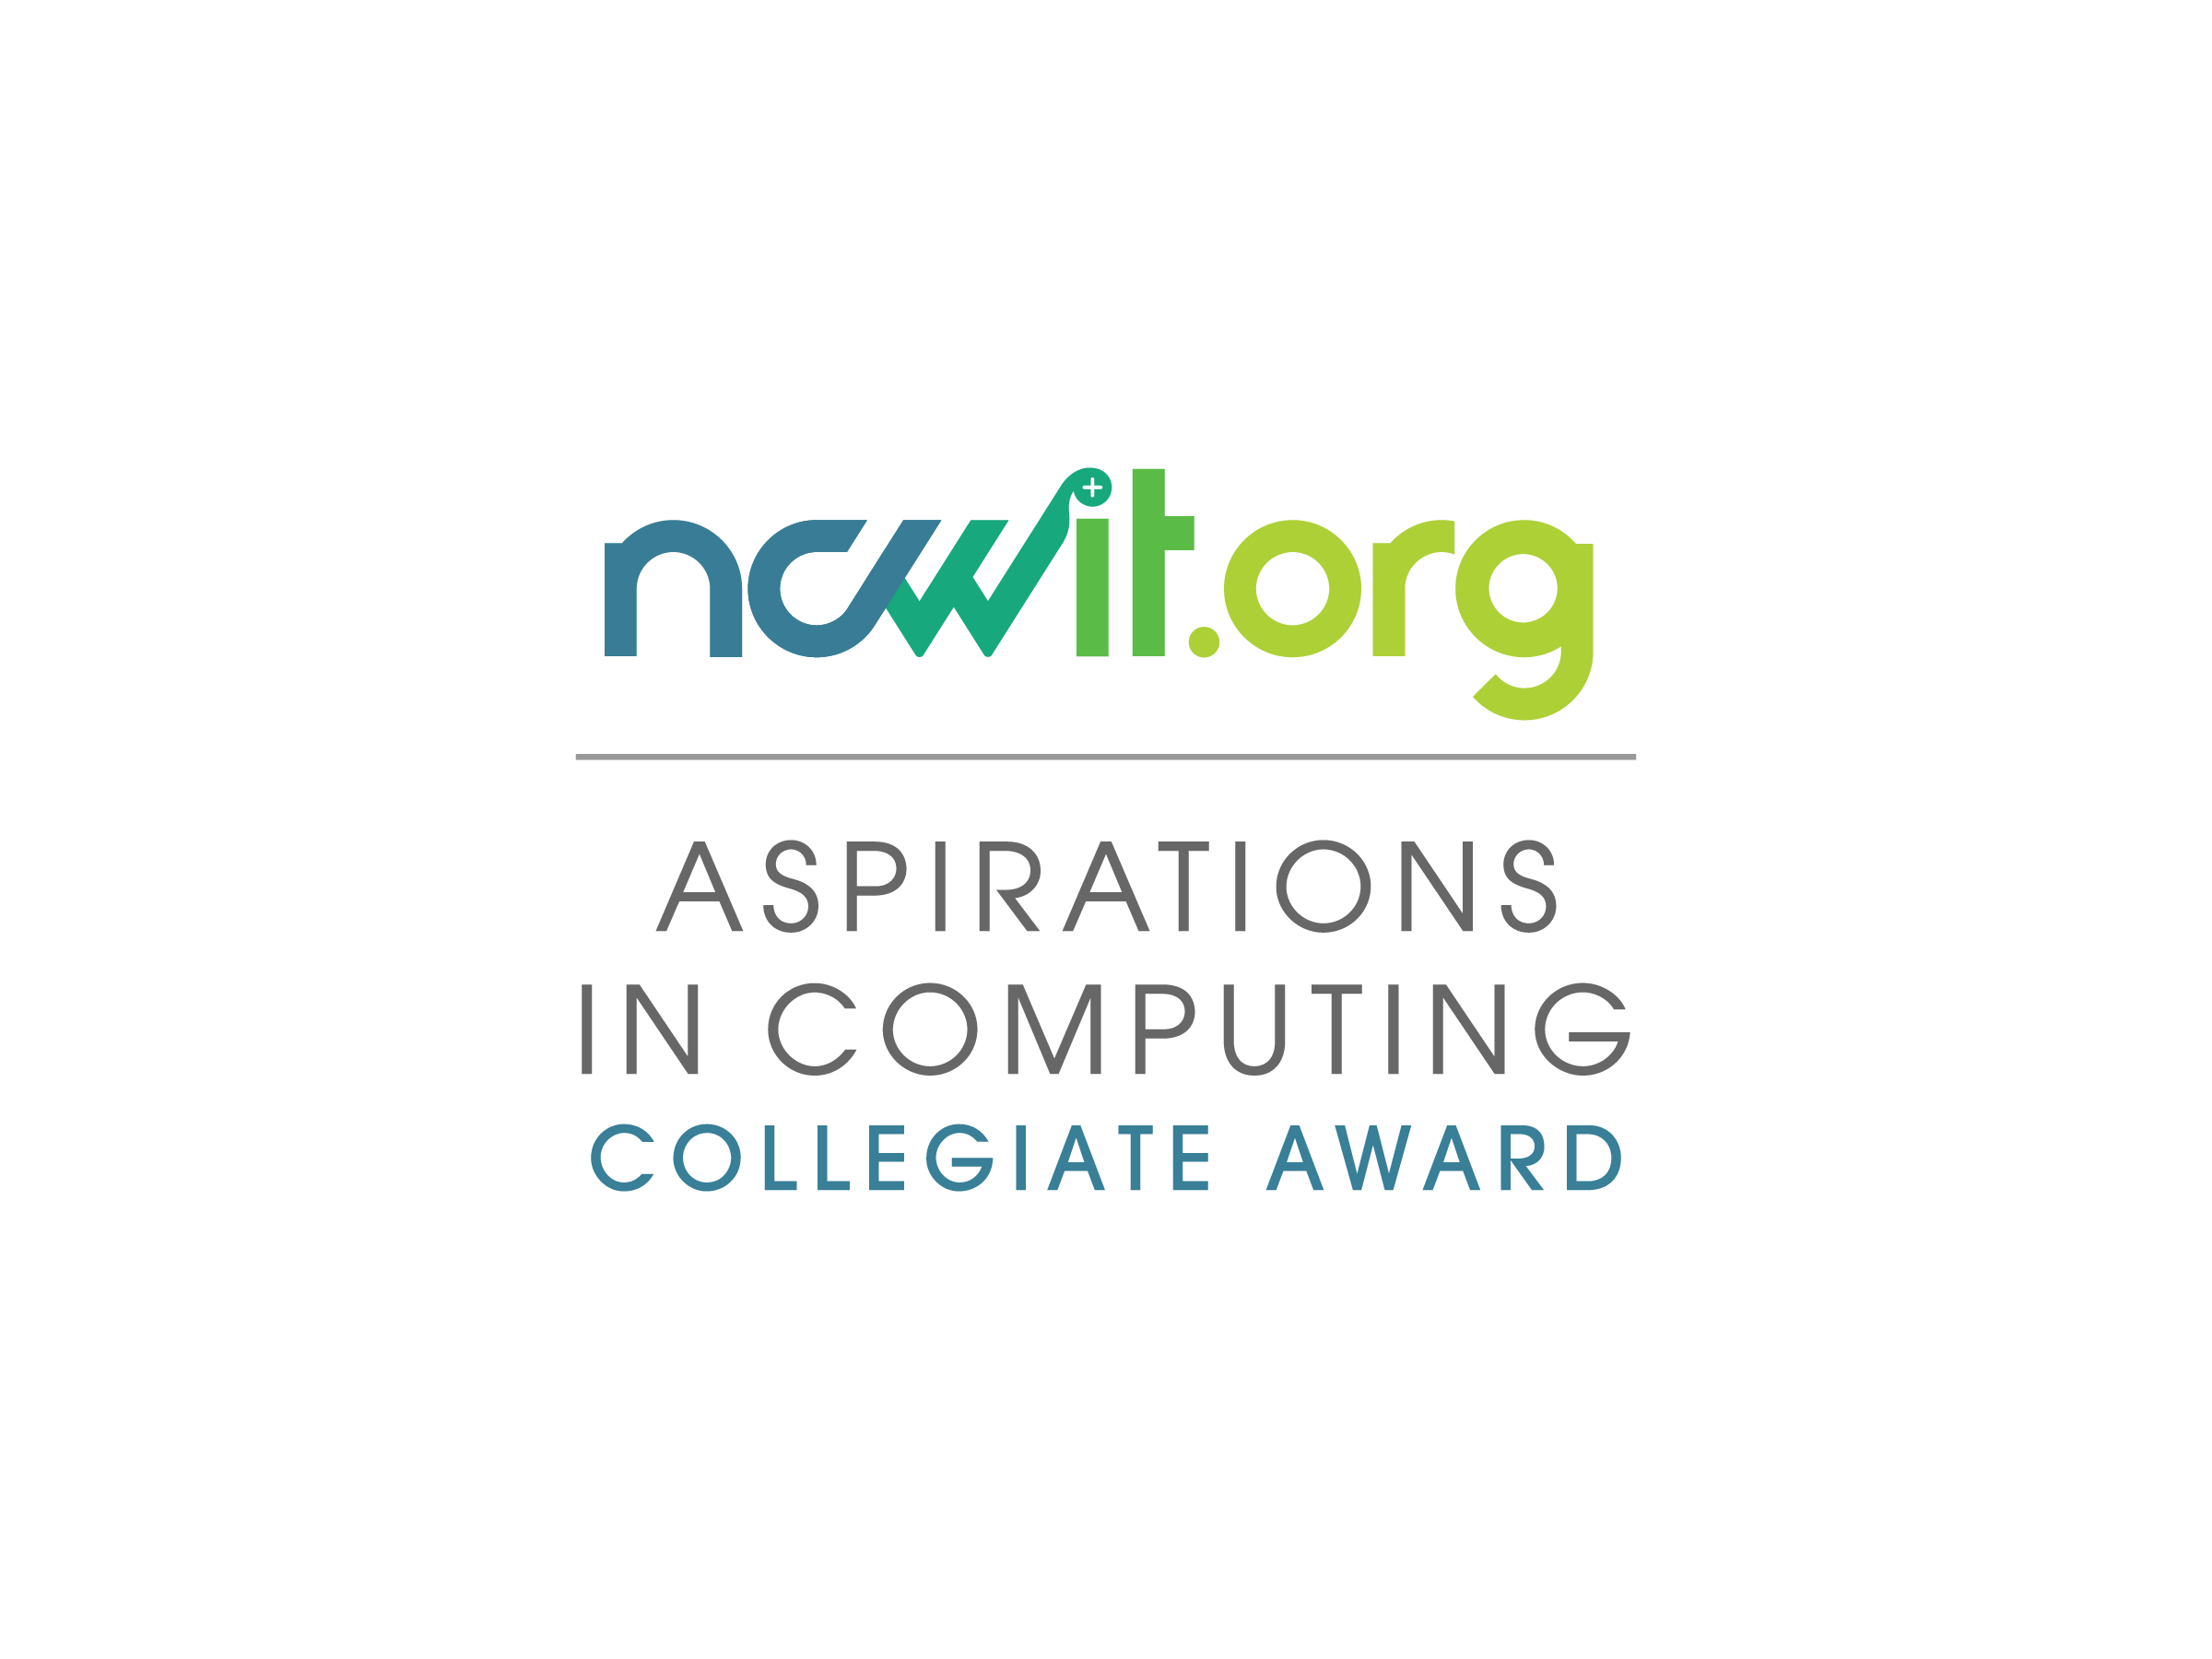 Centered and vertically aligned color logo for the ncwit.org | Aspirations in Computing Collegiate Award